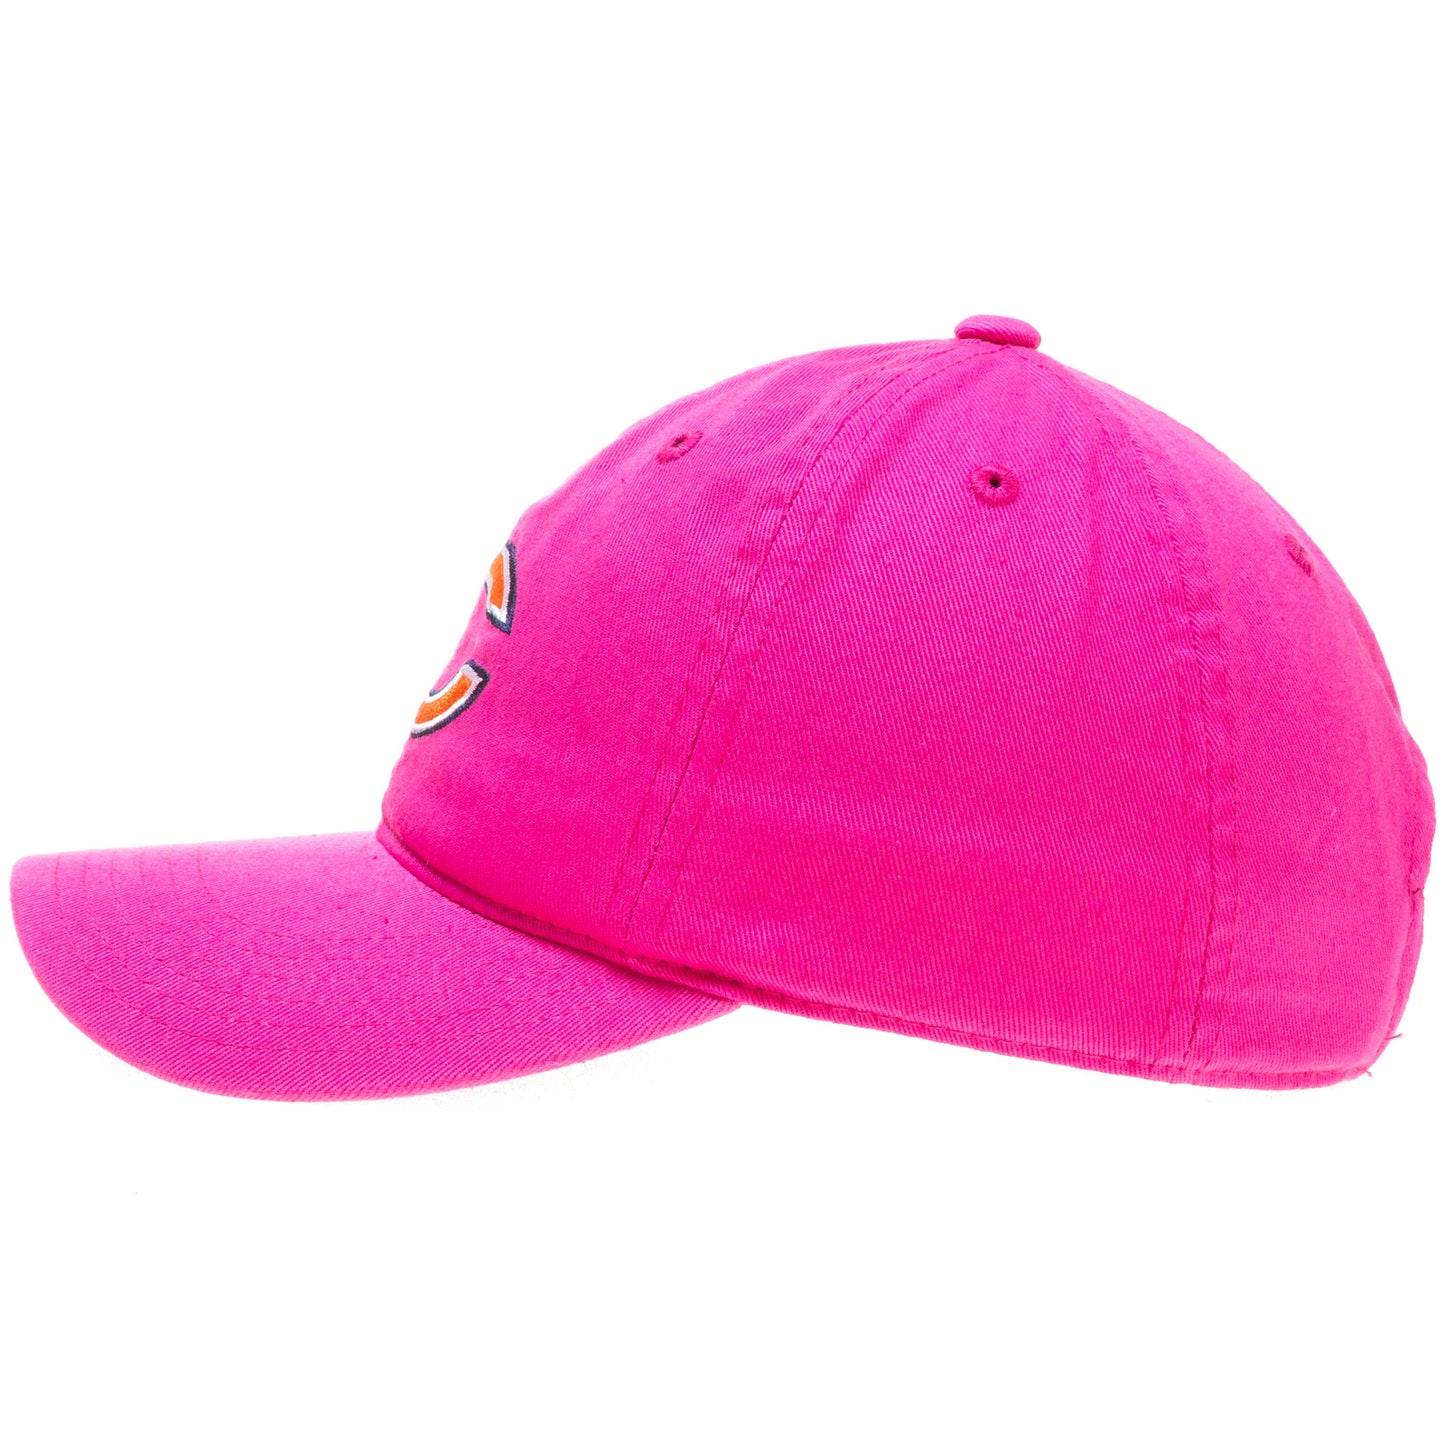 Youth Chicago Bears Logo Pink Adjustable Hat